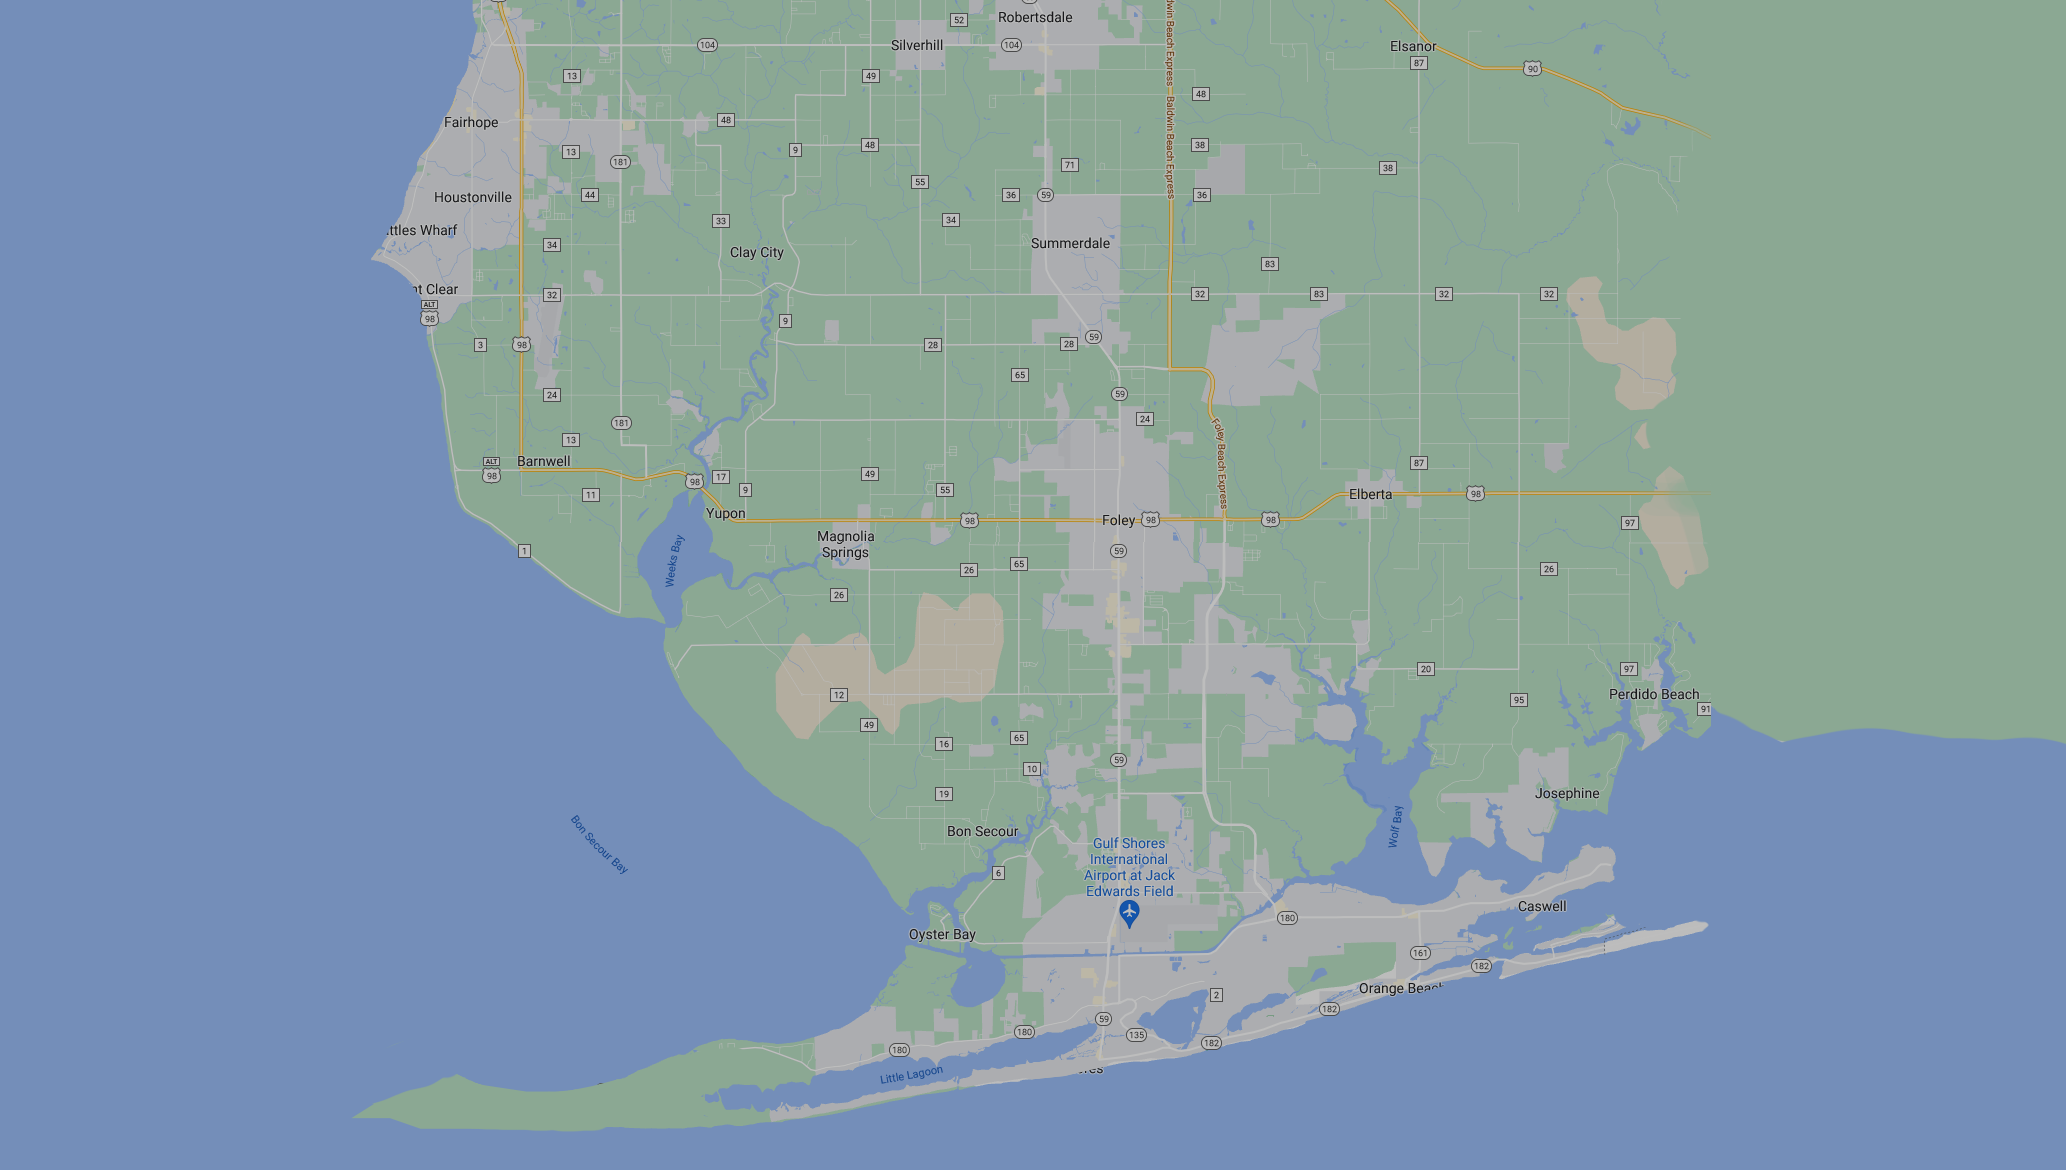 A map snippet of Gulf Shores, Alabama and surrounding areas